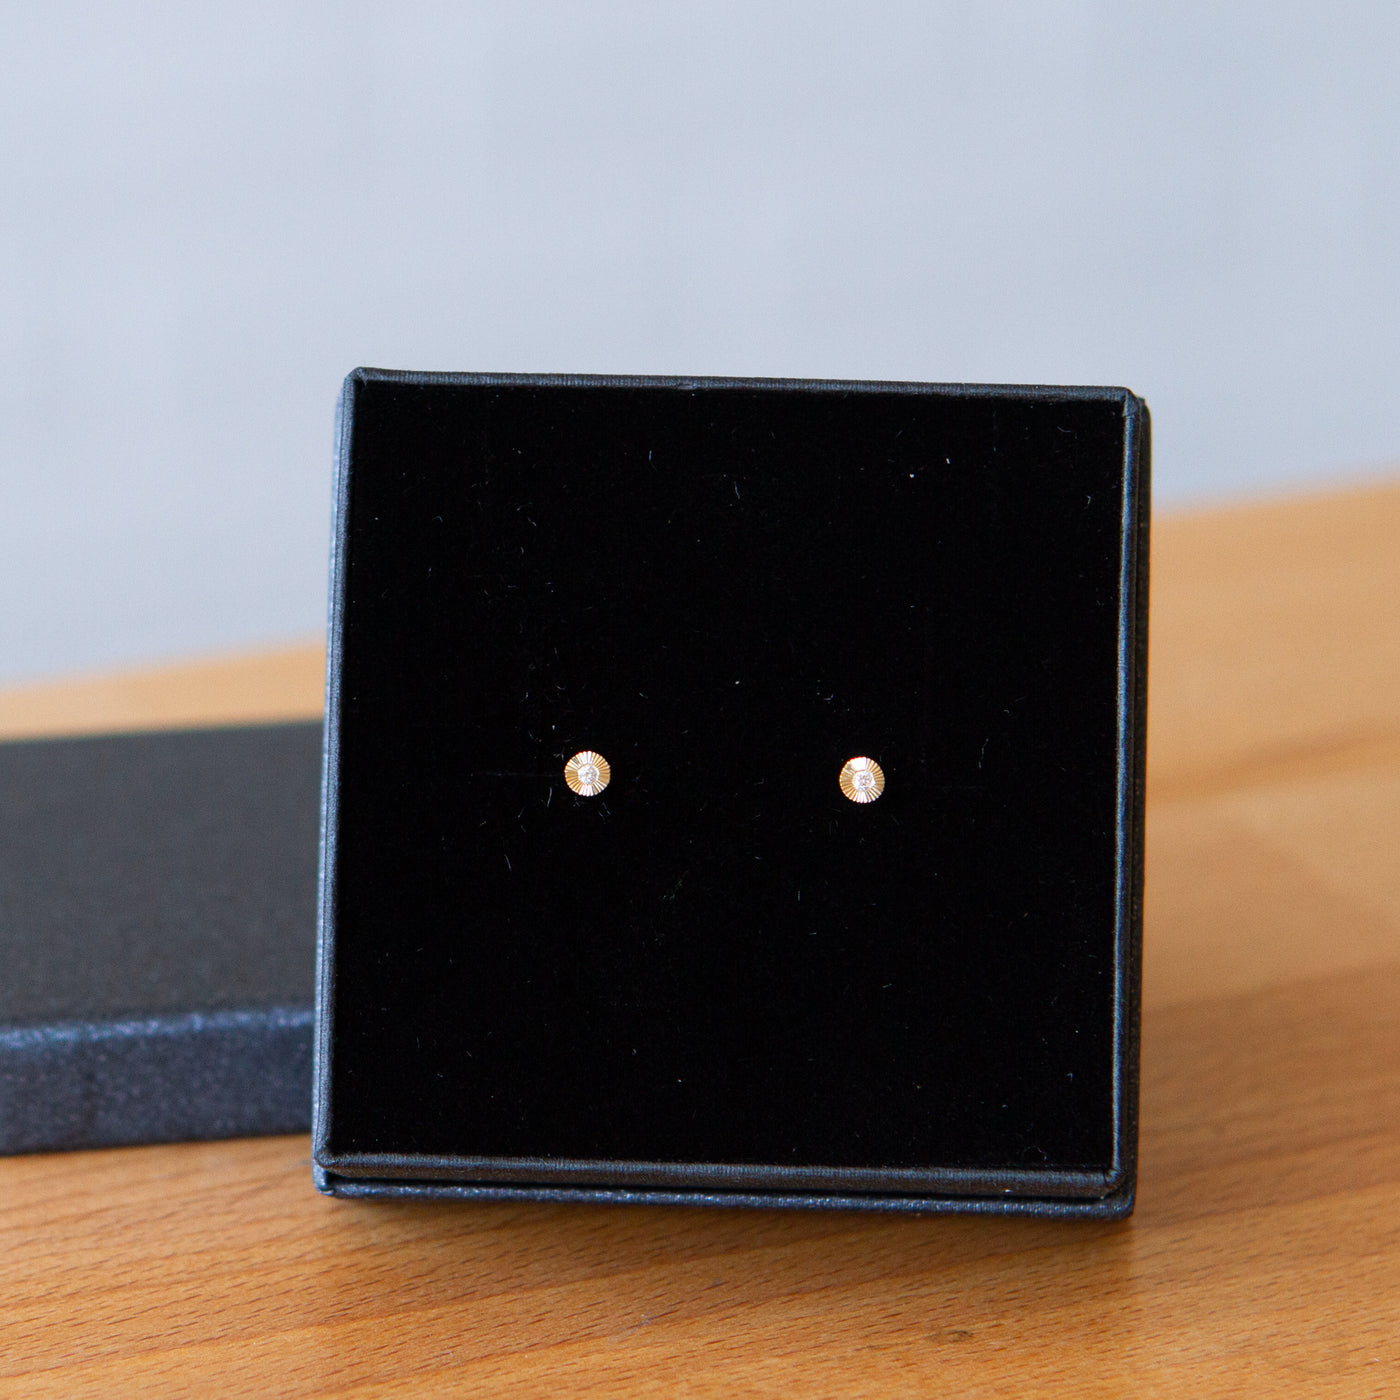 14k yellow gold micro aurora stud earrings with diamond centers and an engraved halo border in gift box